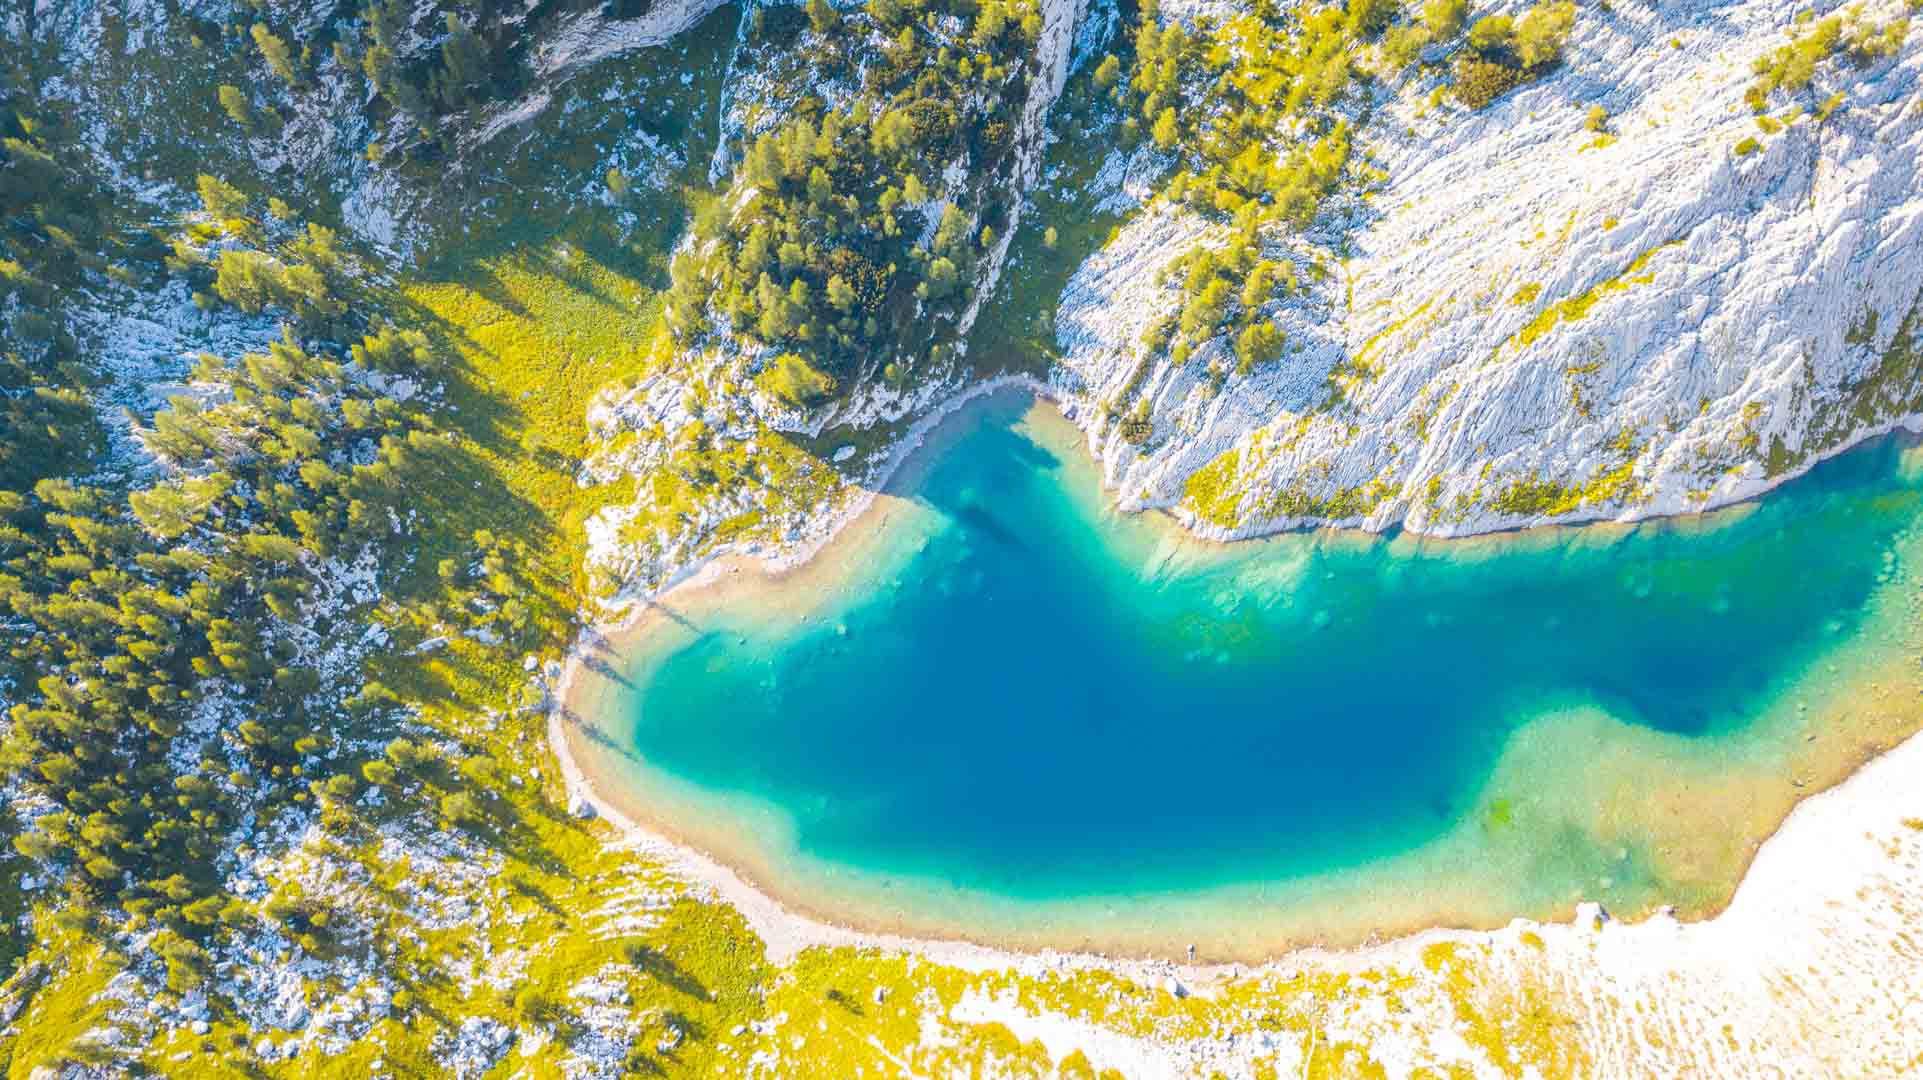 Lake Ledvica from the sky